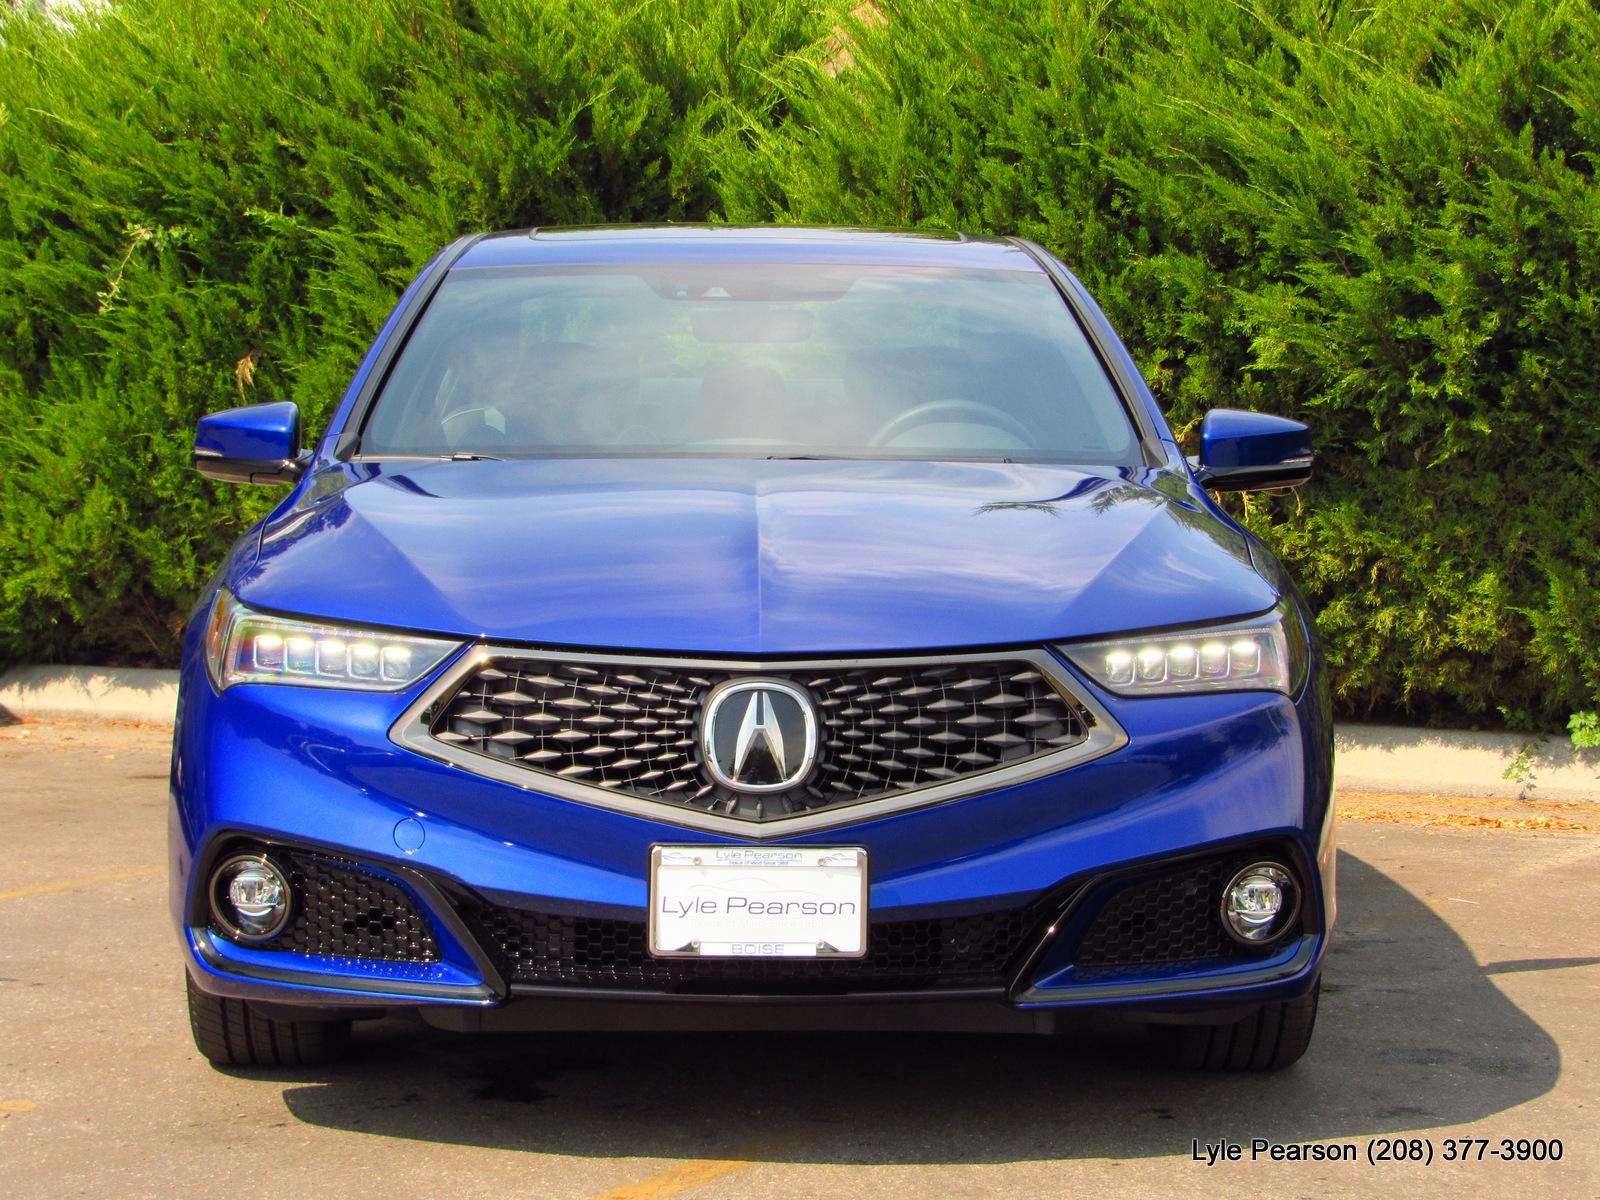 New 2019 Acura TLX 3.5L FWD w/A-SPEC Pkg 4dr Car in Boise #19A1248 | Lyle Pearson Auto Group 2019 Acura Tlx A Spec Aftermarket Parts